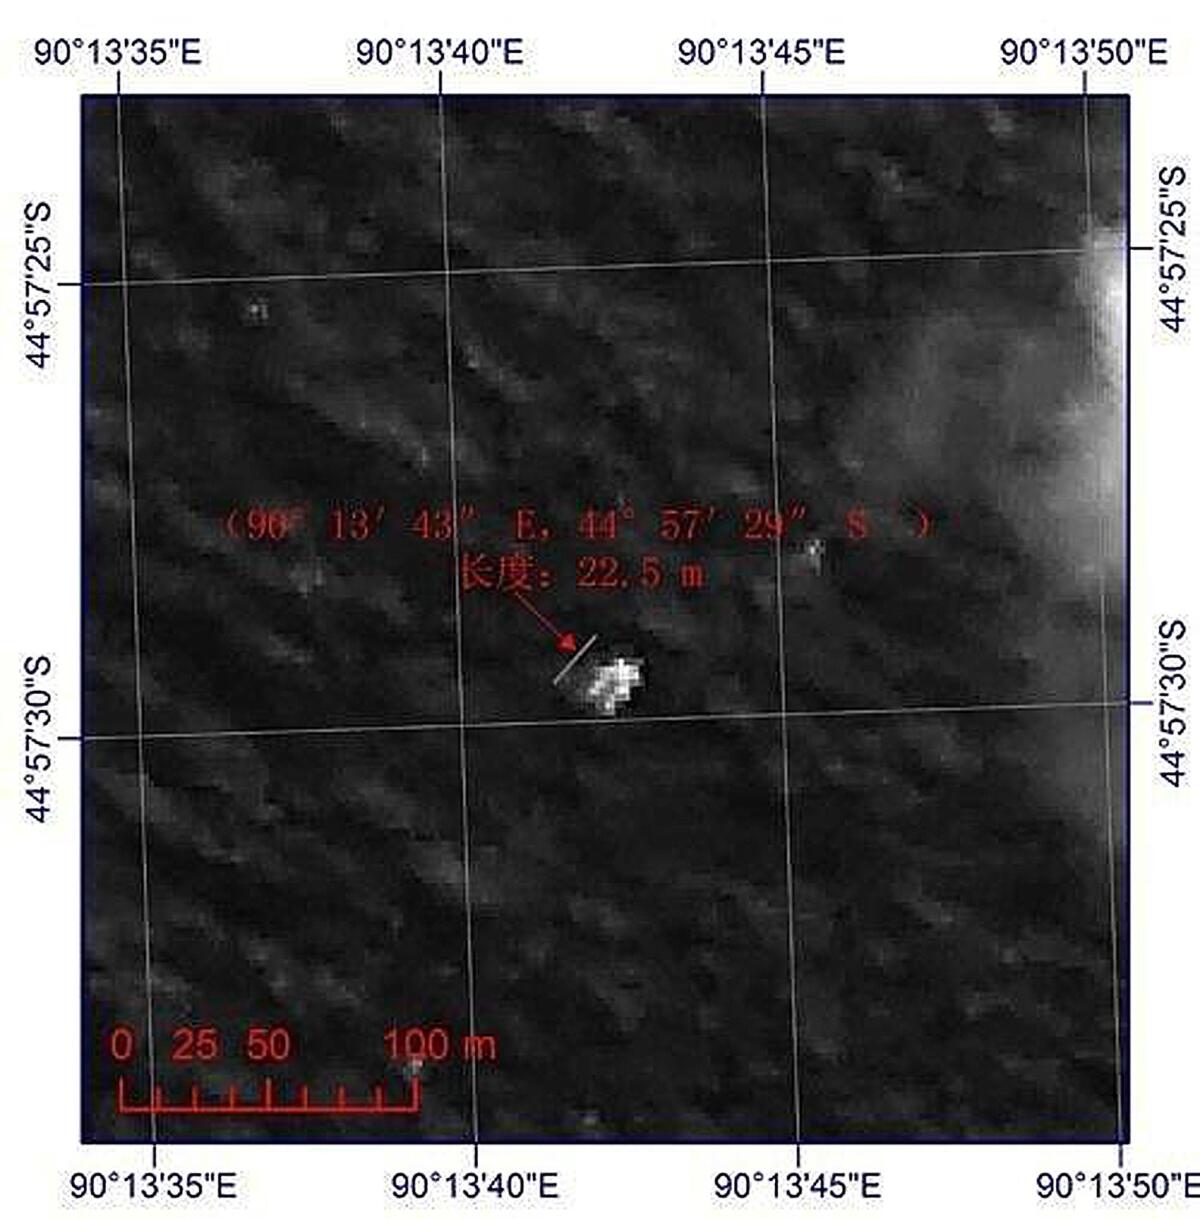 A new image from a Chinese satellite shows a large object floating in the Indian Ocean that could be part of Malaysia Airlines Flight 370.